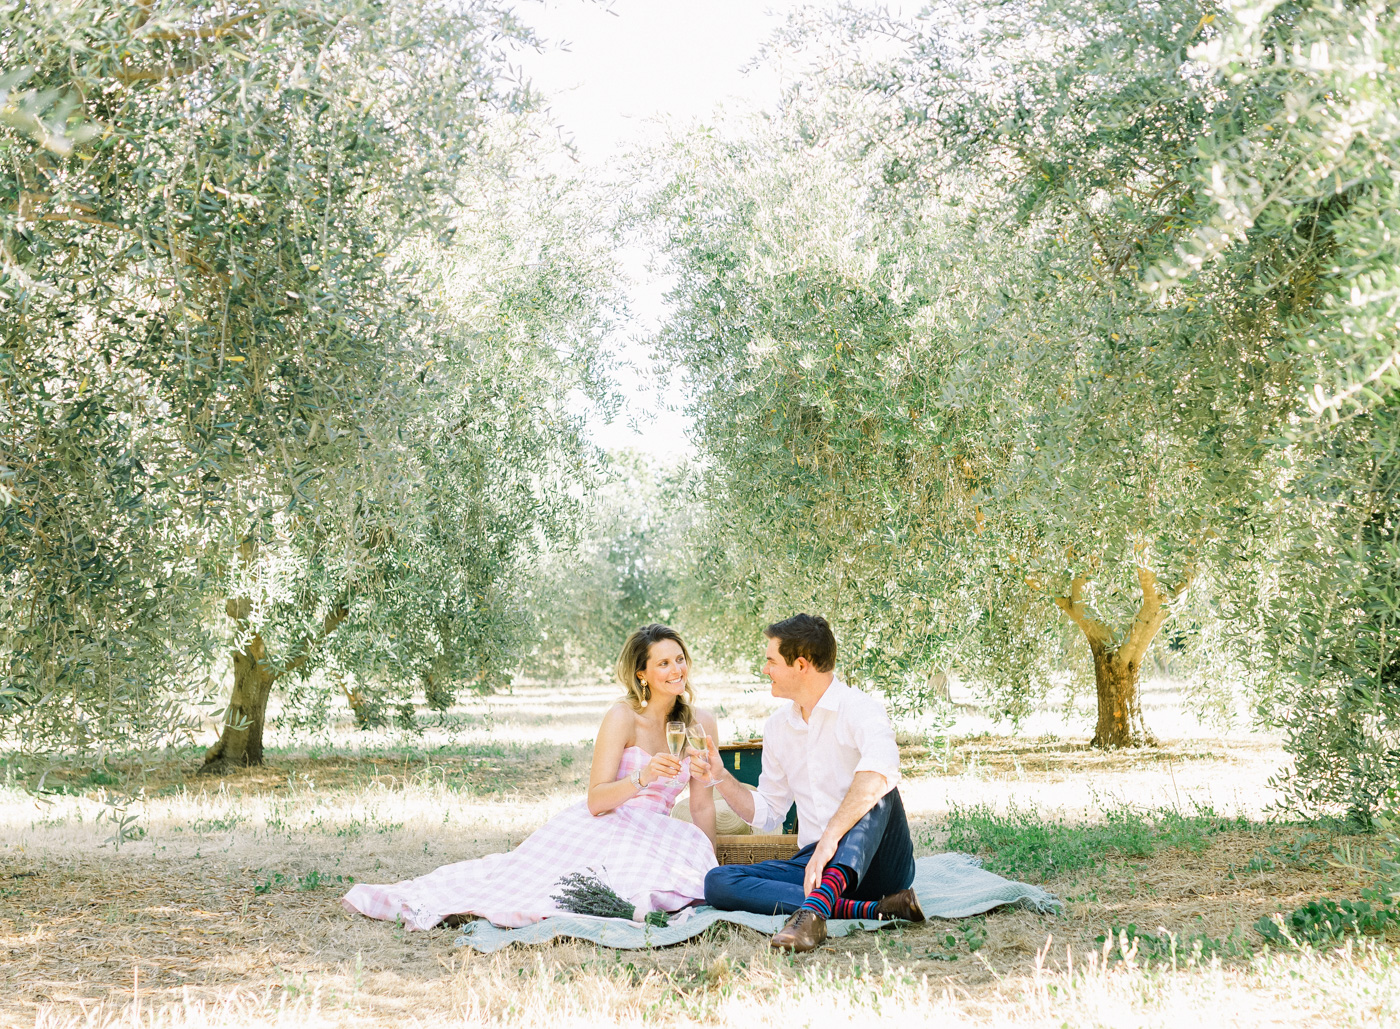 Napa Engagement Photos - Picnic in the Olive Grove